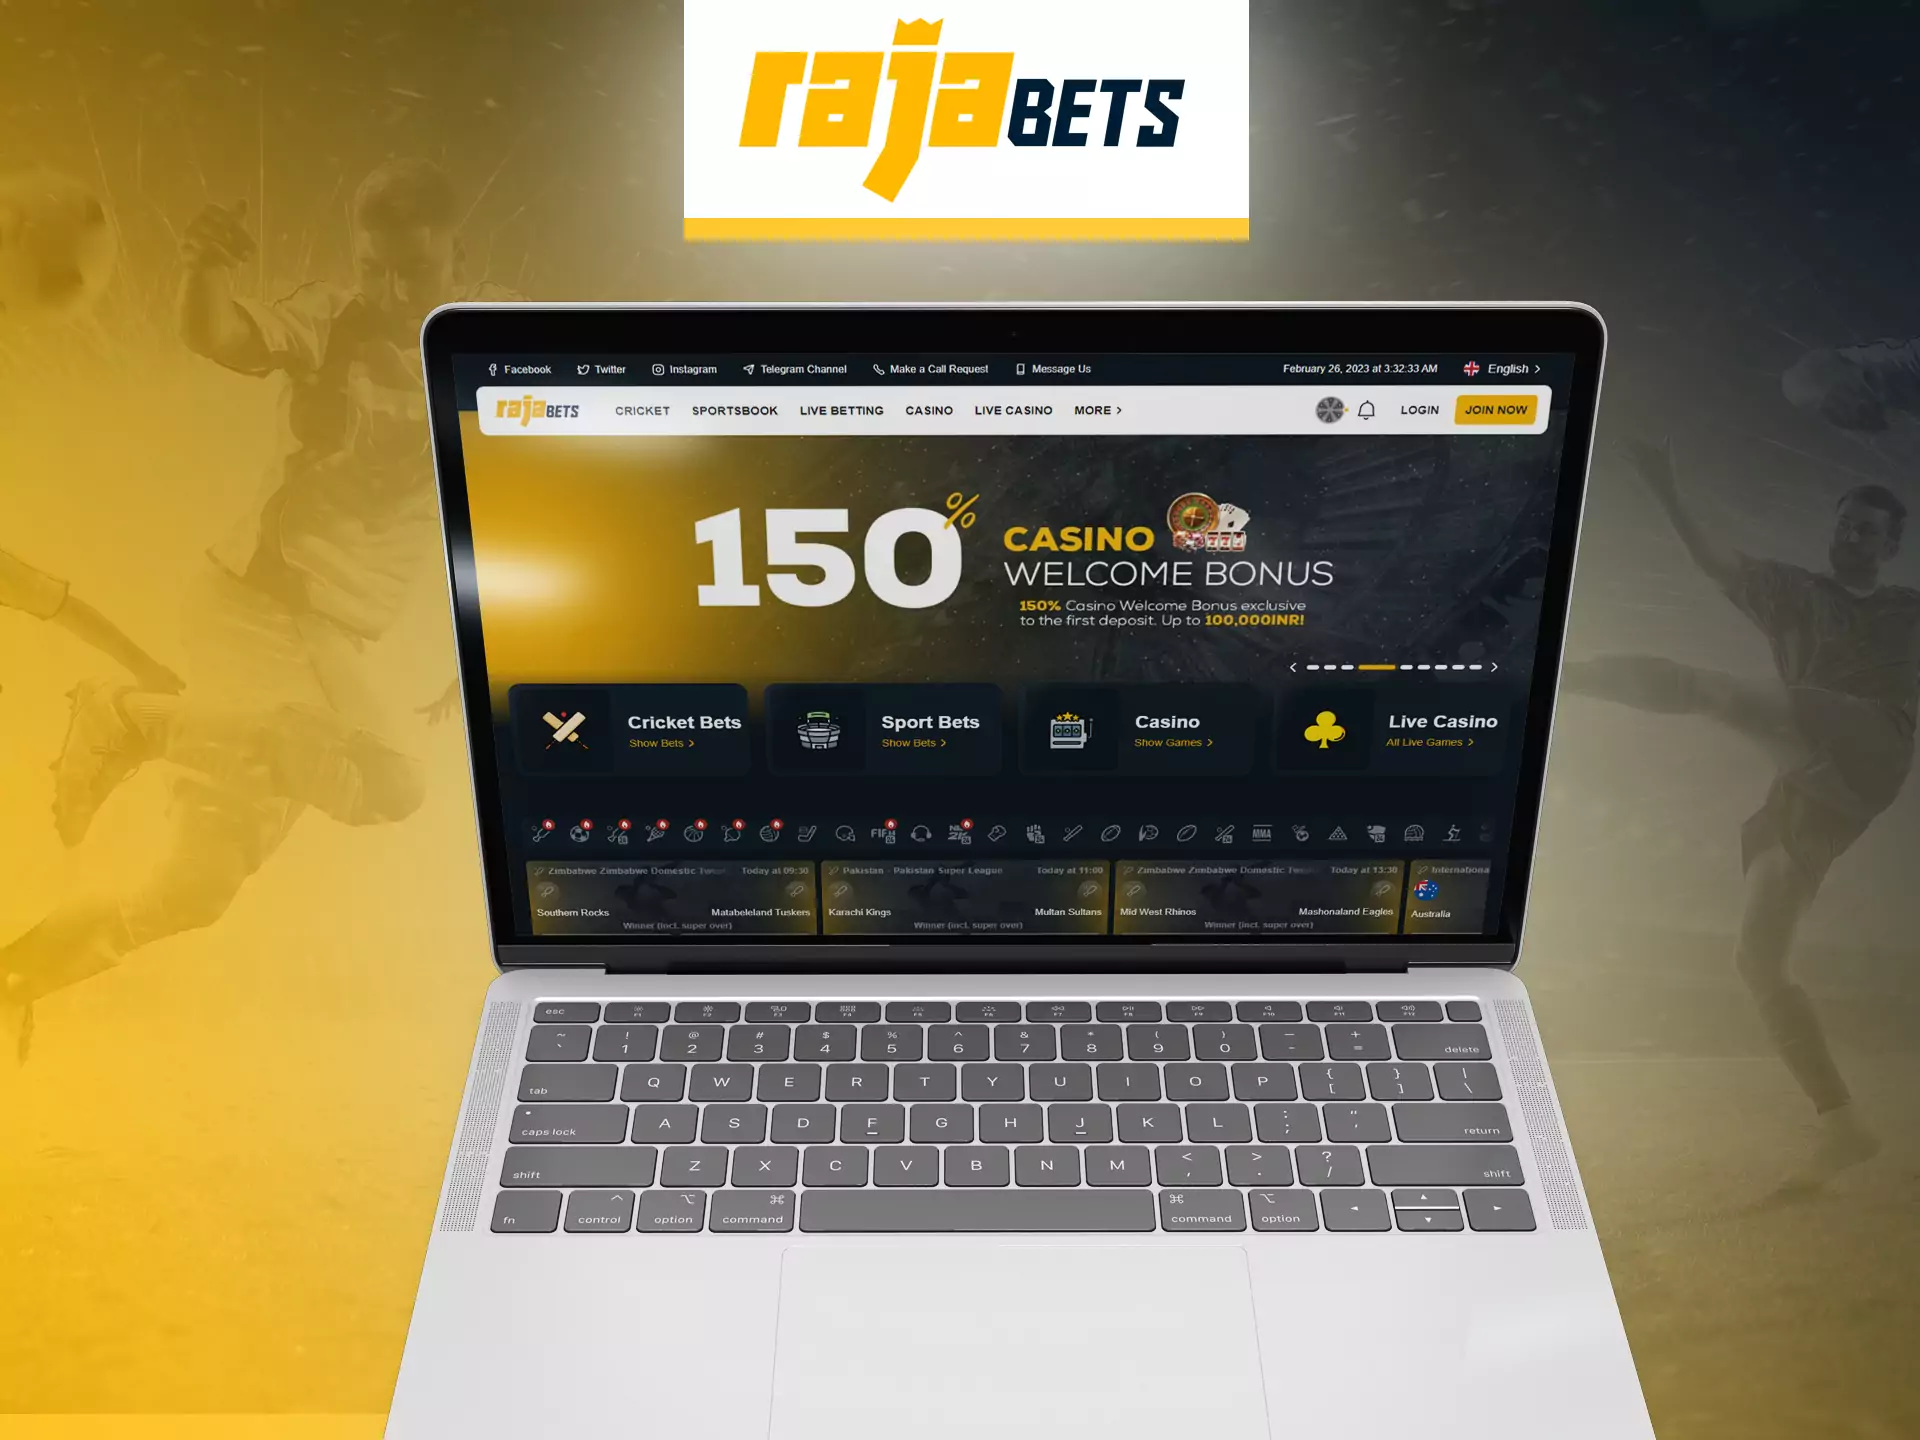 With Rajabets you can play and bet on your favorite sports on your personal computer.